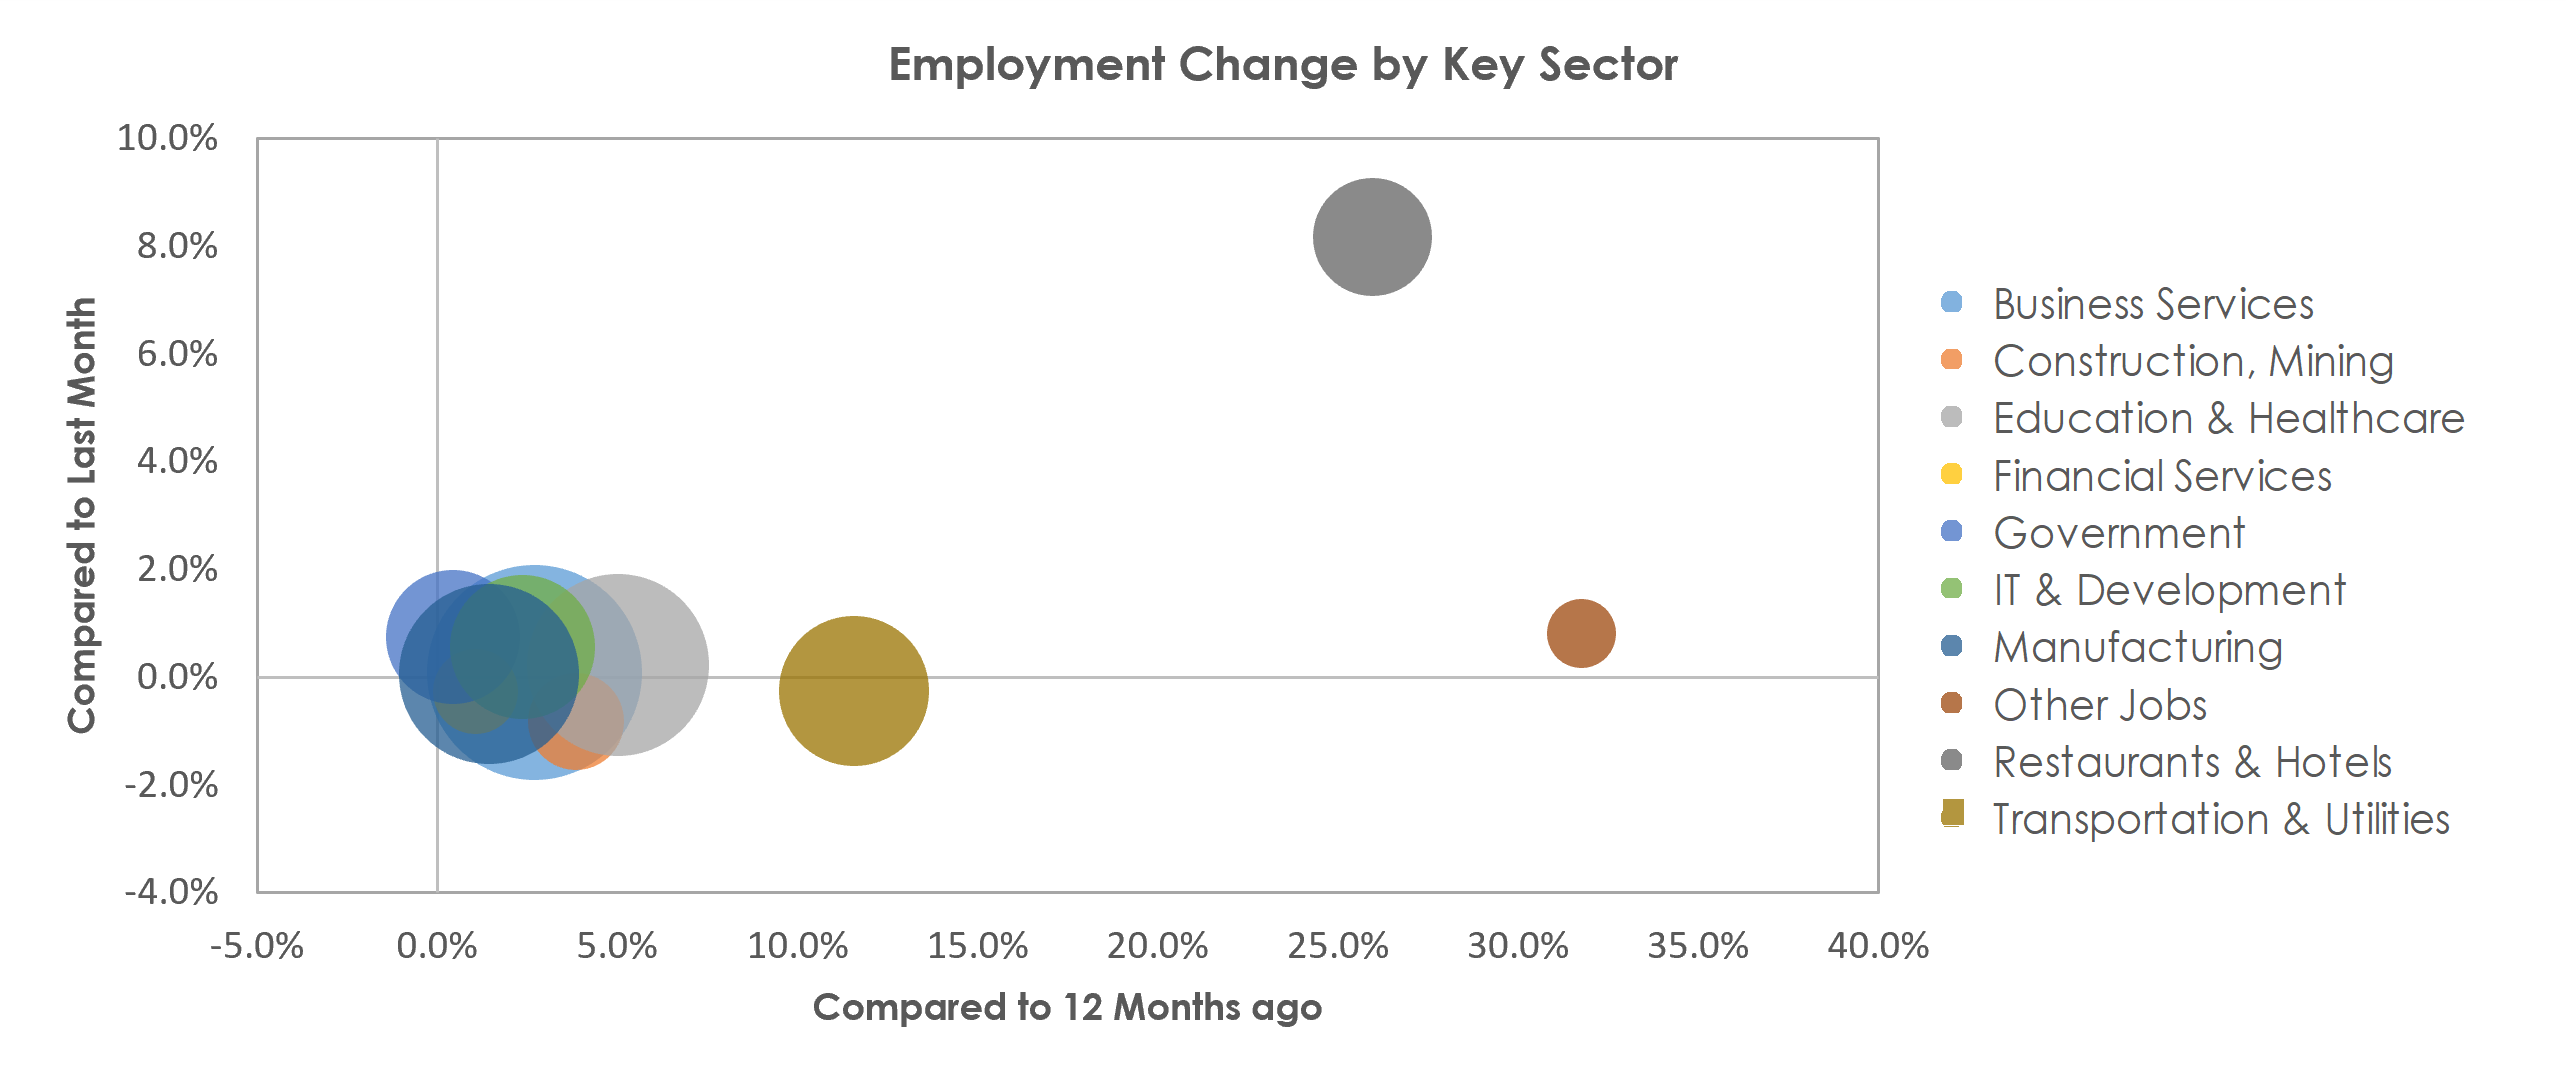 San Jose-Sunnyvale-Santa Clara, CA Unemployment by Industry May 2021